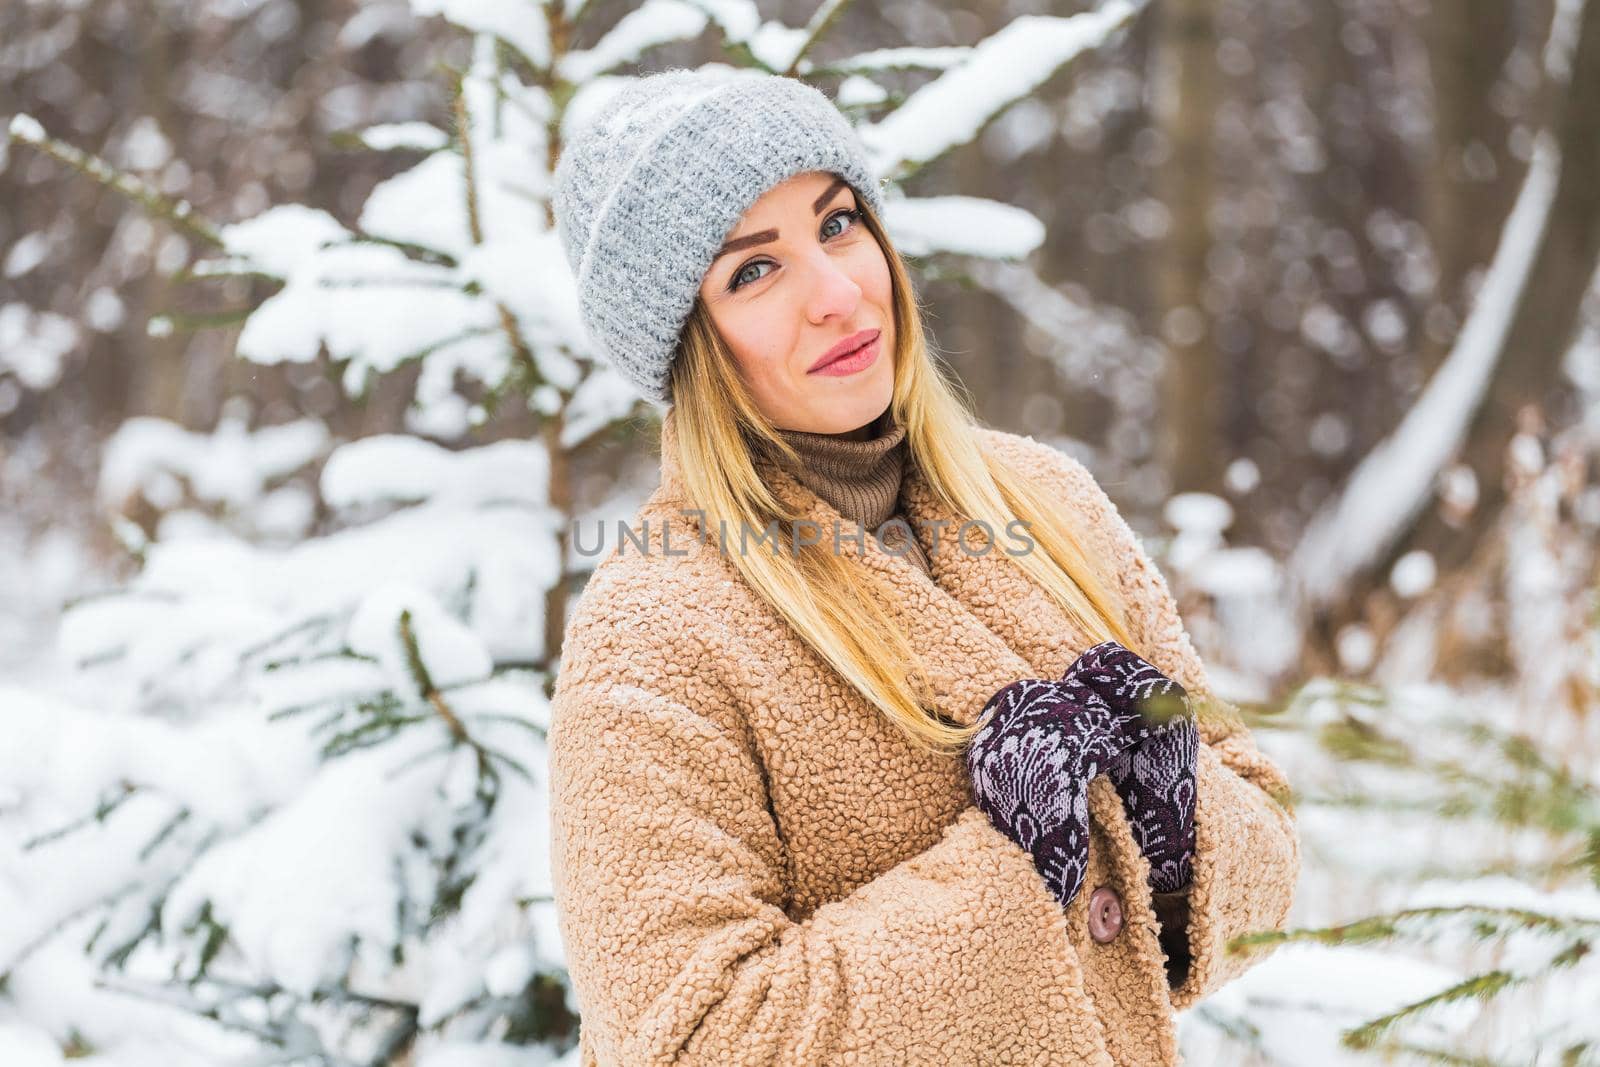 Attractive young woman in winter time outdoor. Snow, holidays and season concept. by Satura86